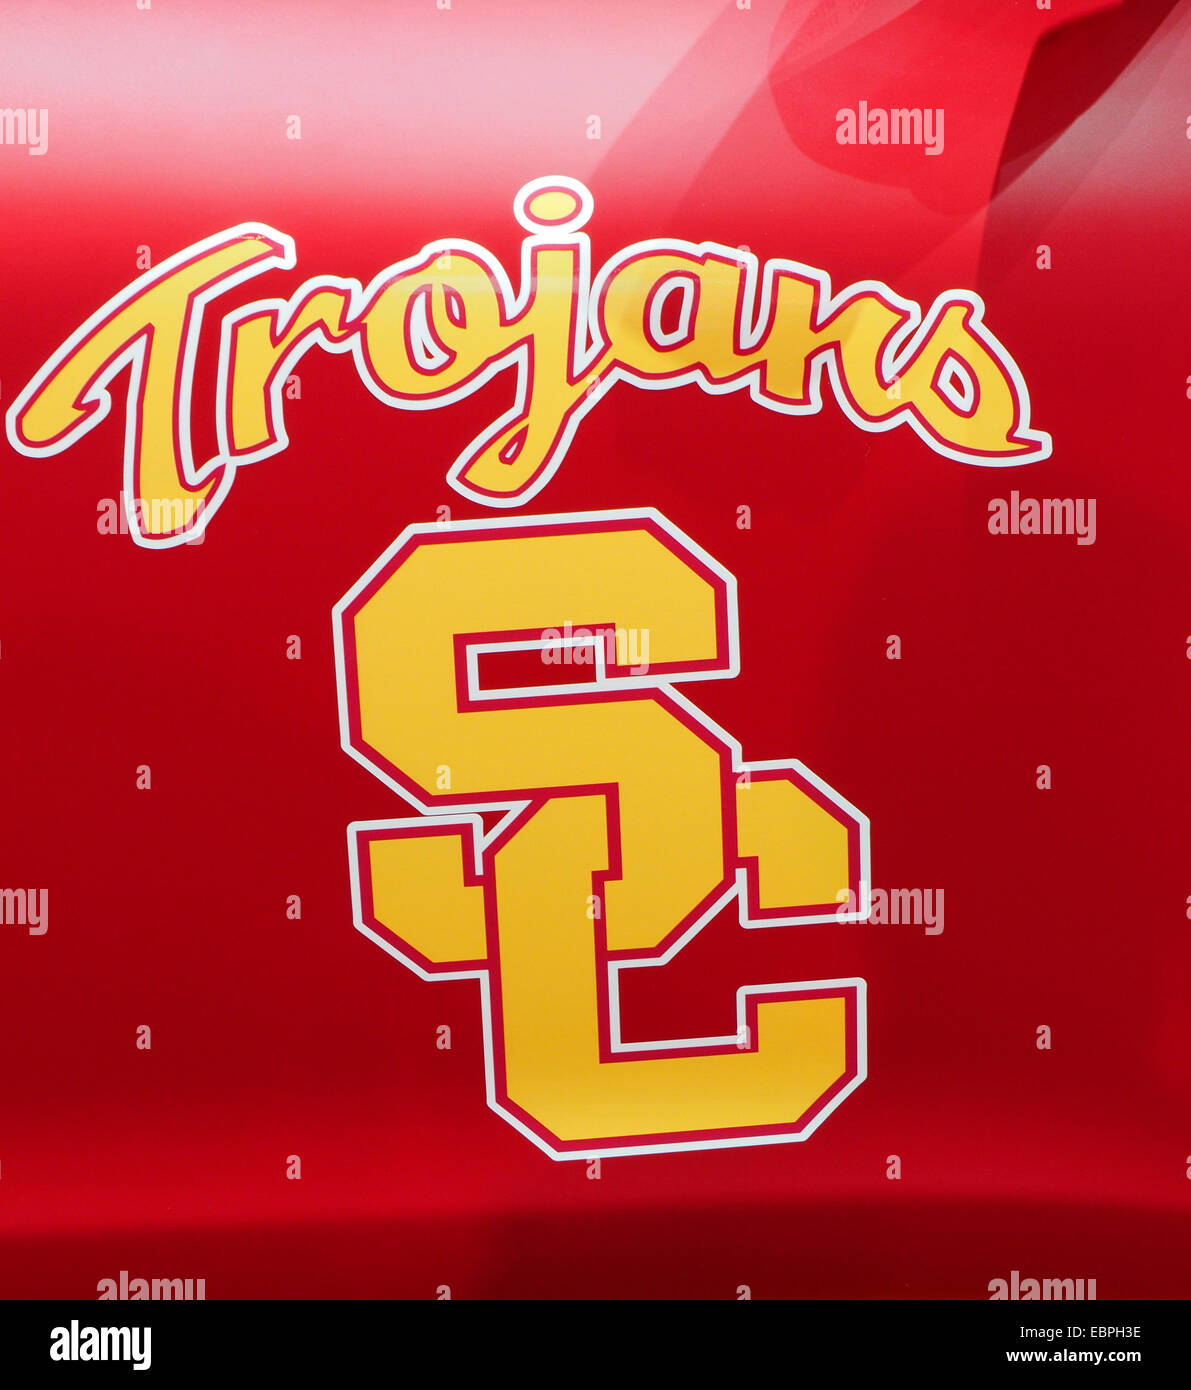 Car in colors of the USC Trojan Football Team with Logos Stock Photo